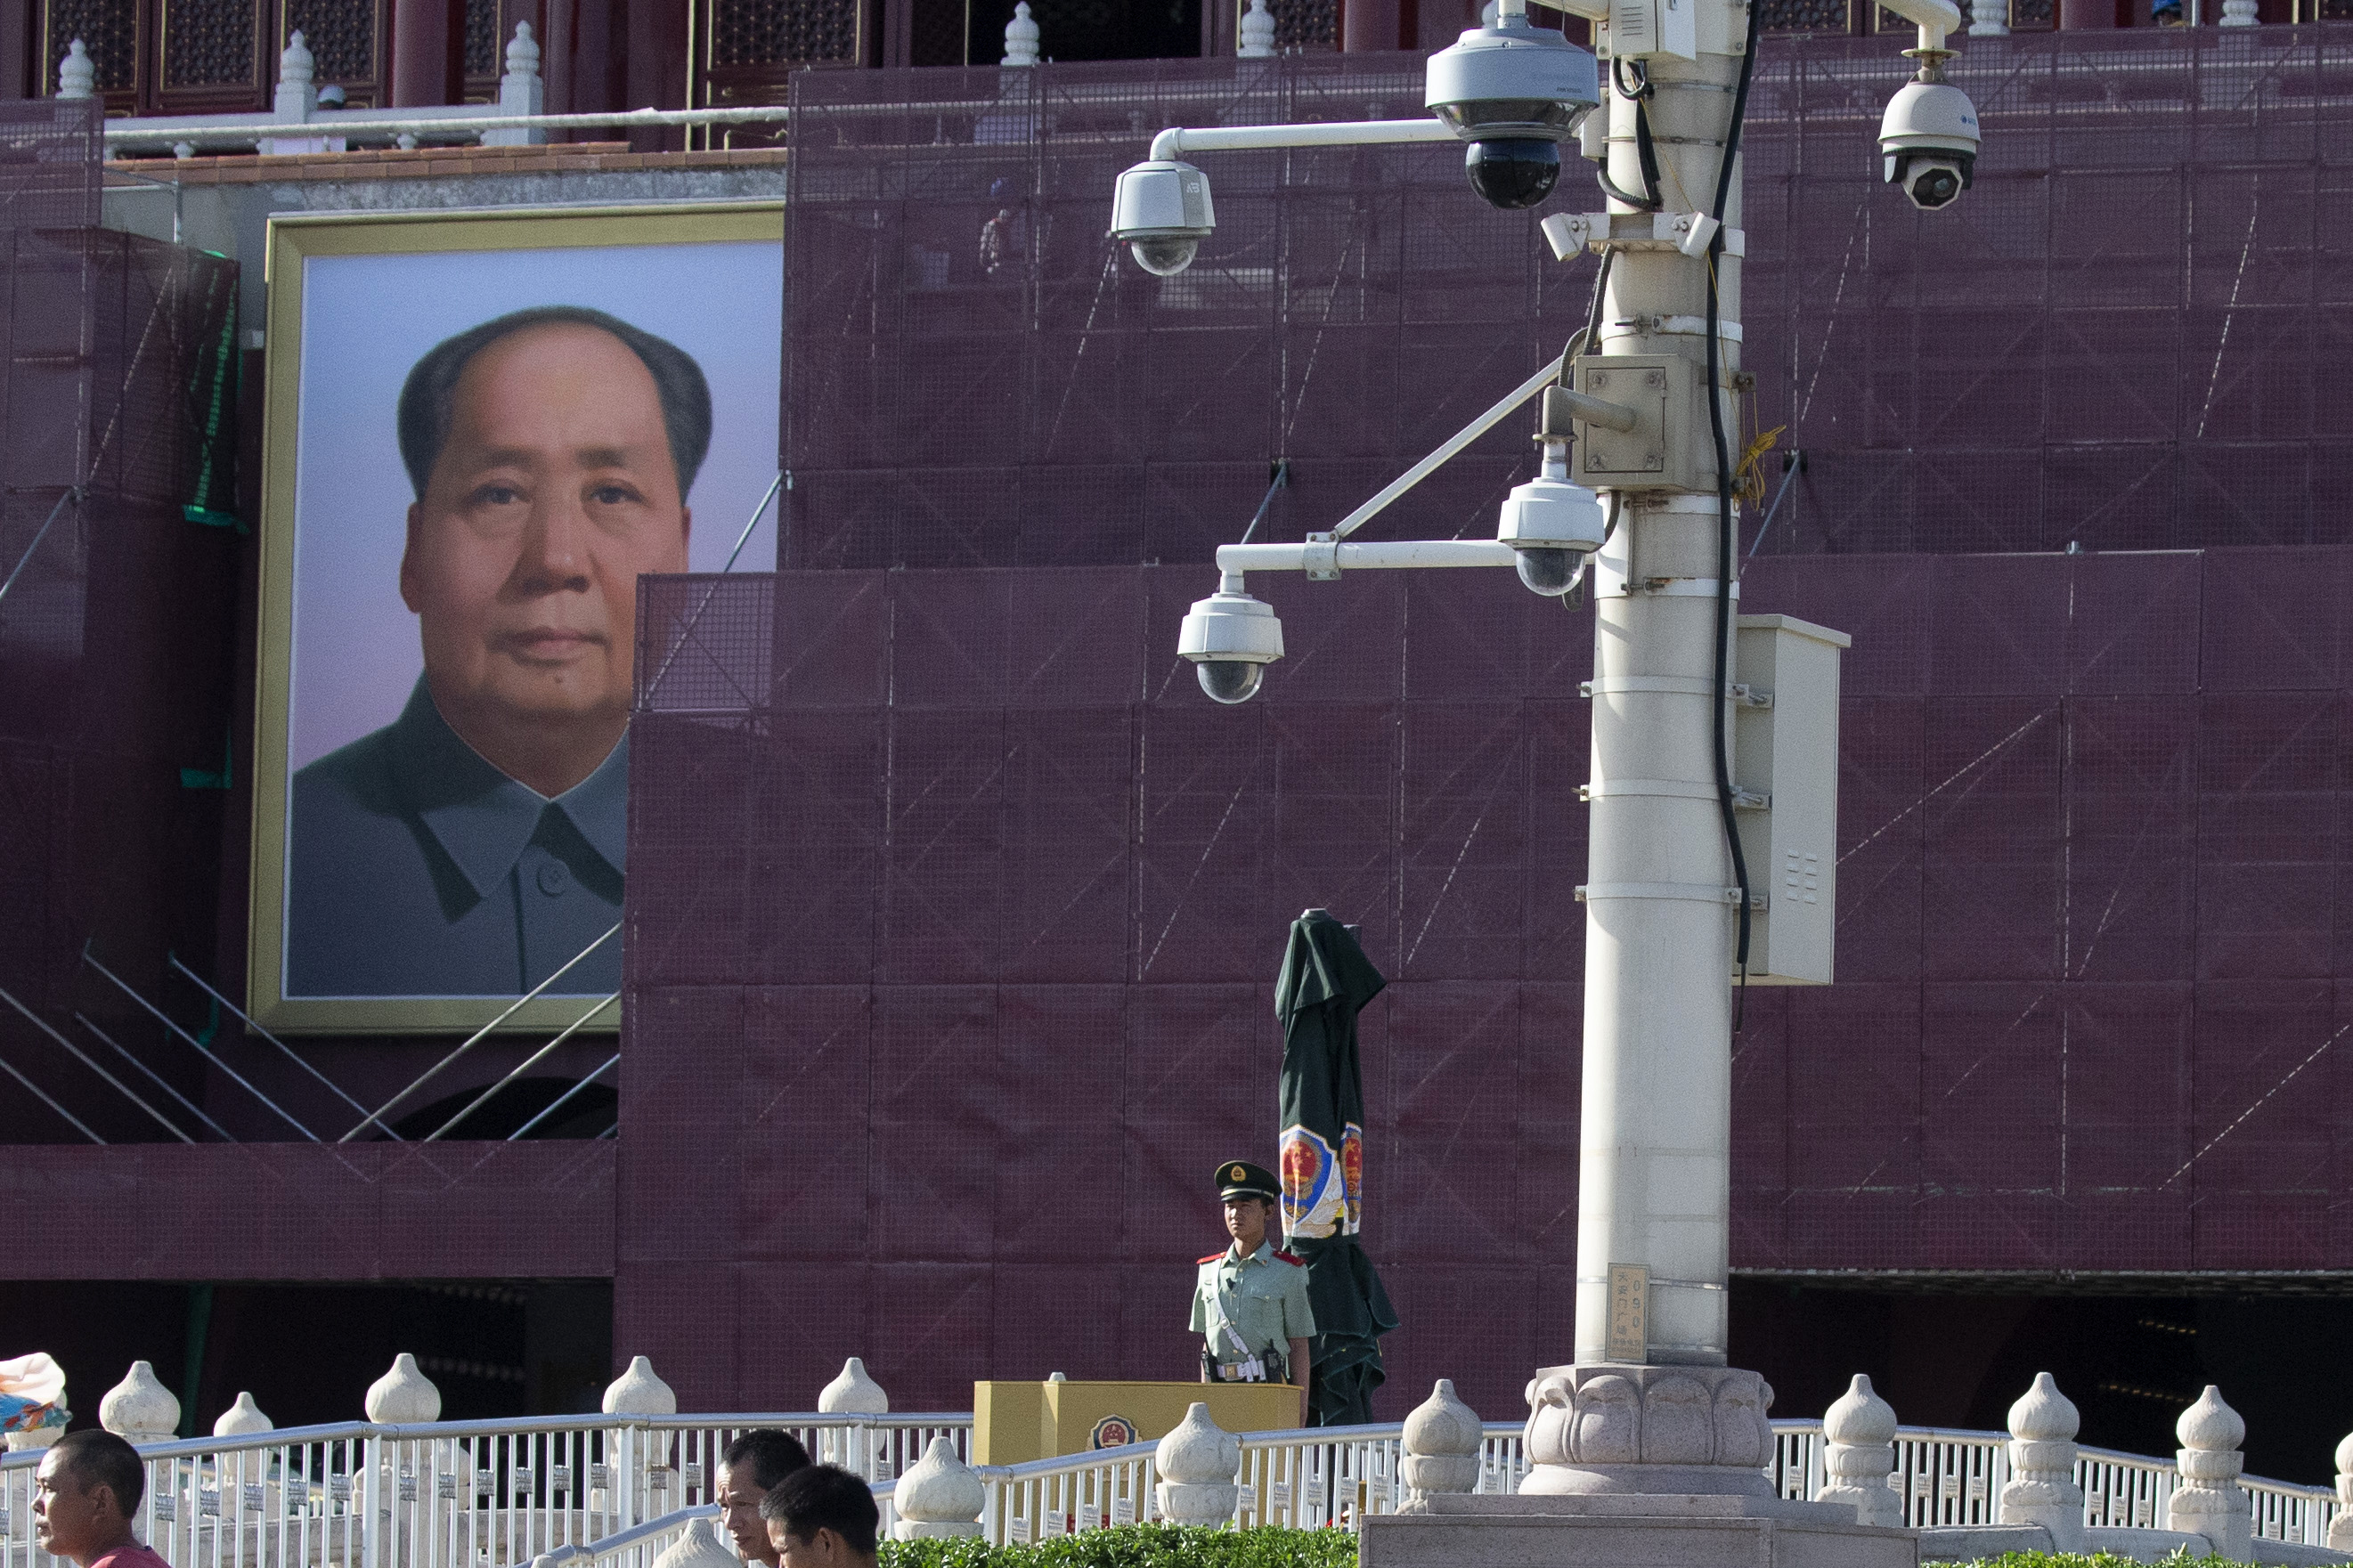 A paramilitary policeman stands on duty near security cameras in front of Mao Zedong's portrait on Tiananmen Gate in Beijing on Friday, May 31, 2019. Authorities have stepped up security around Tiananmen Square as the 30th anniversary of the bloody crackdown on pro-democracy protesters approaches for June 4. (AP Photo/Ng Han Guan)